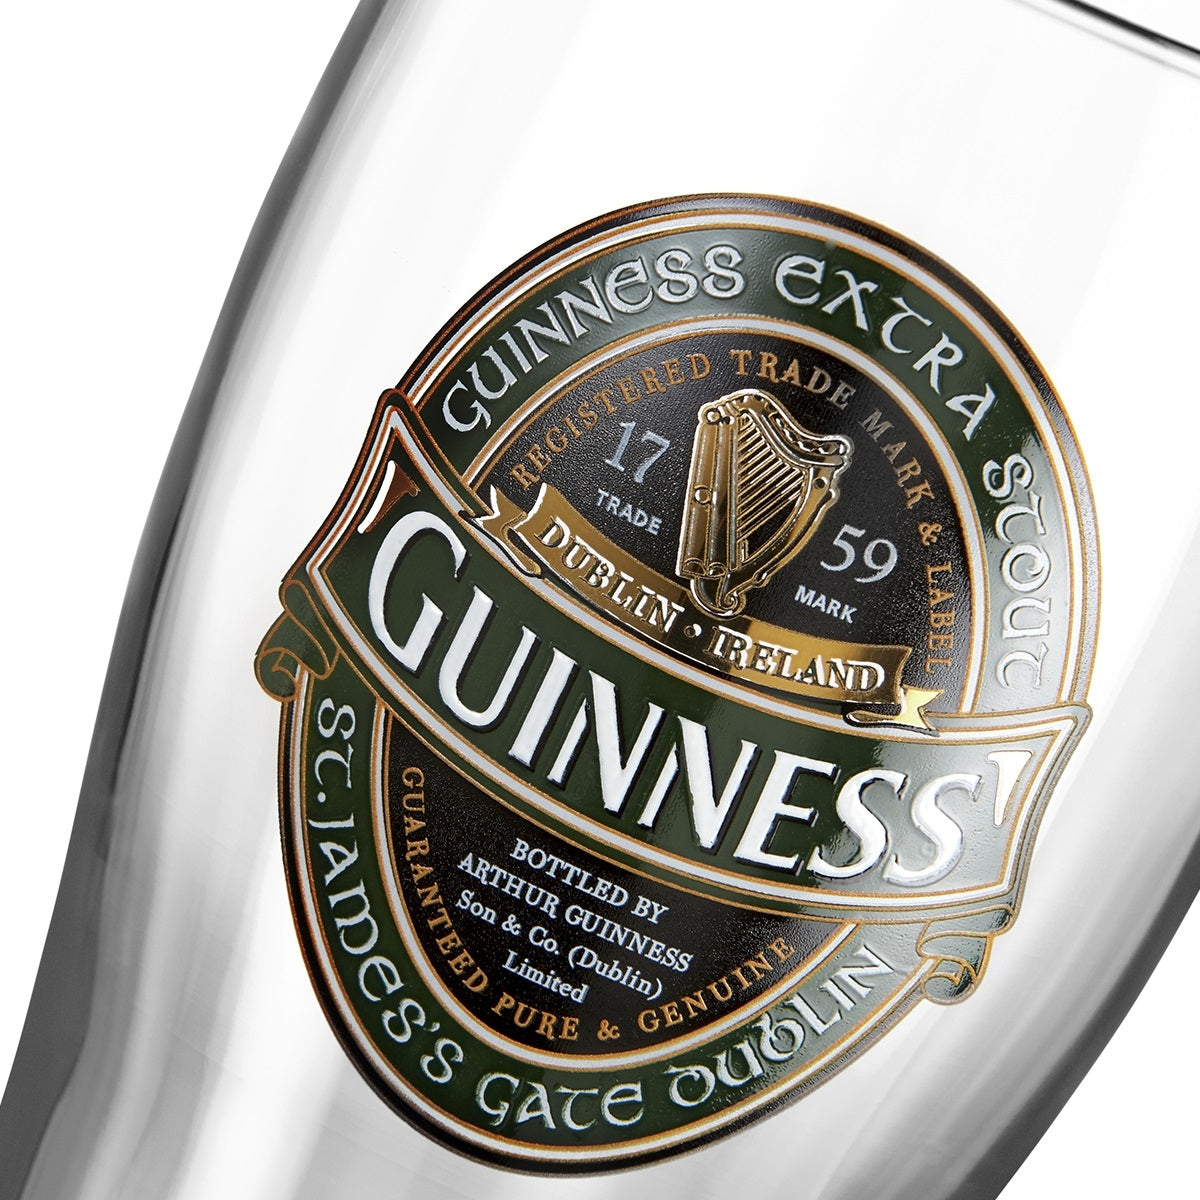 A Guinness Ireland Collection Pint Glass 4 Pack with a label on it.